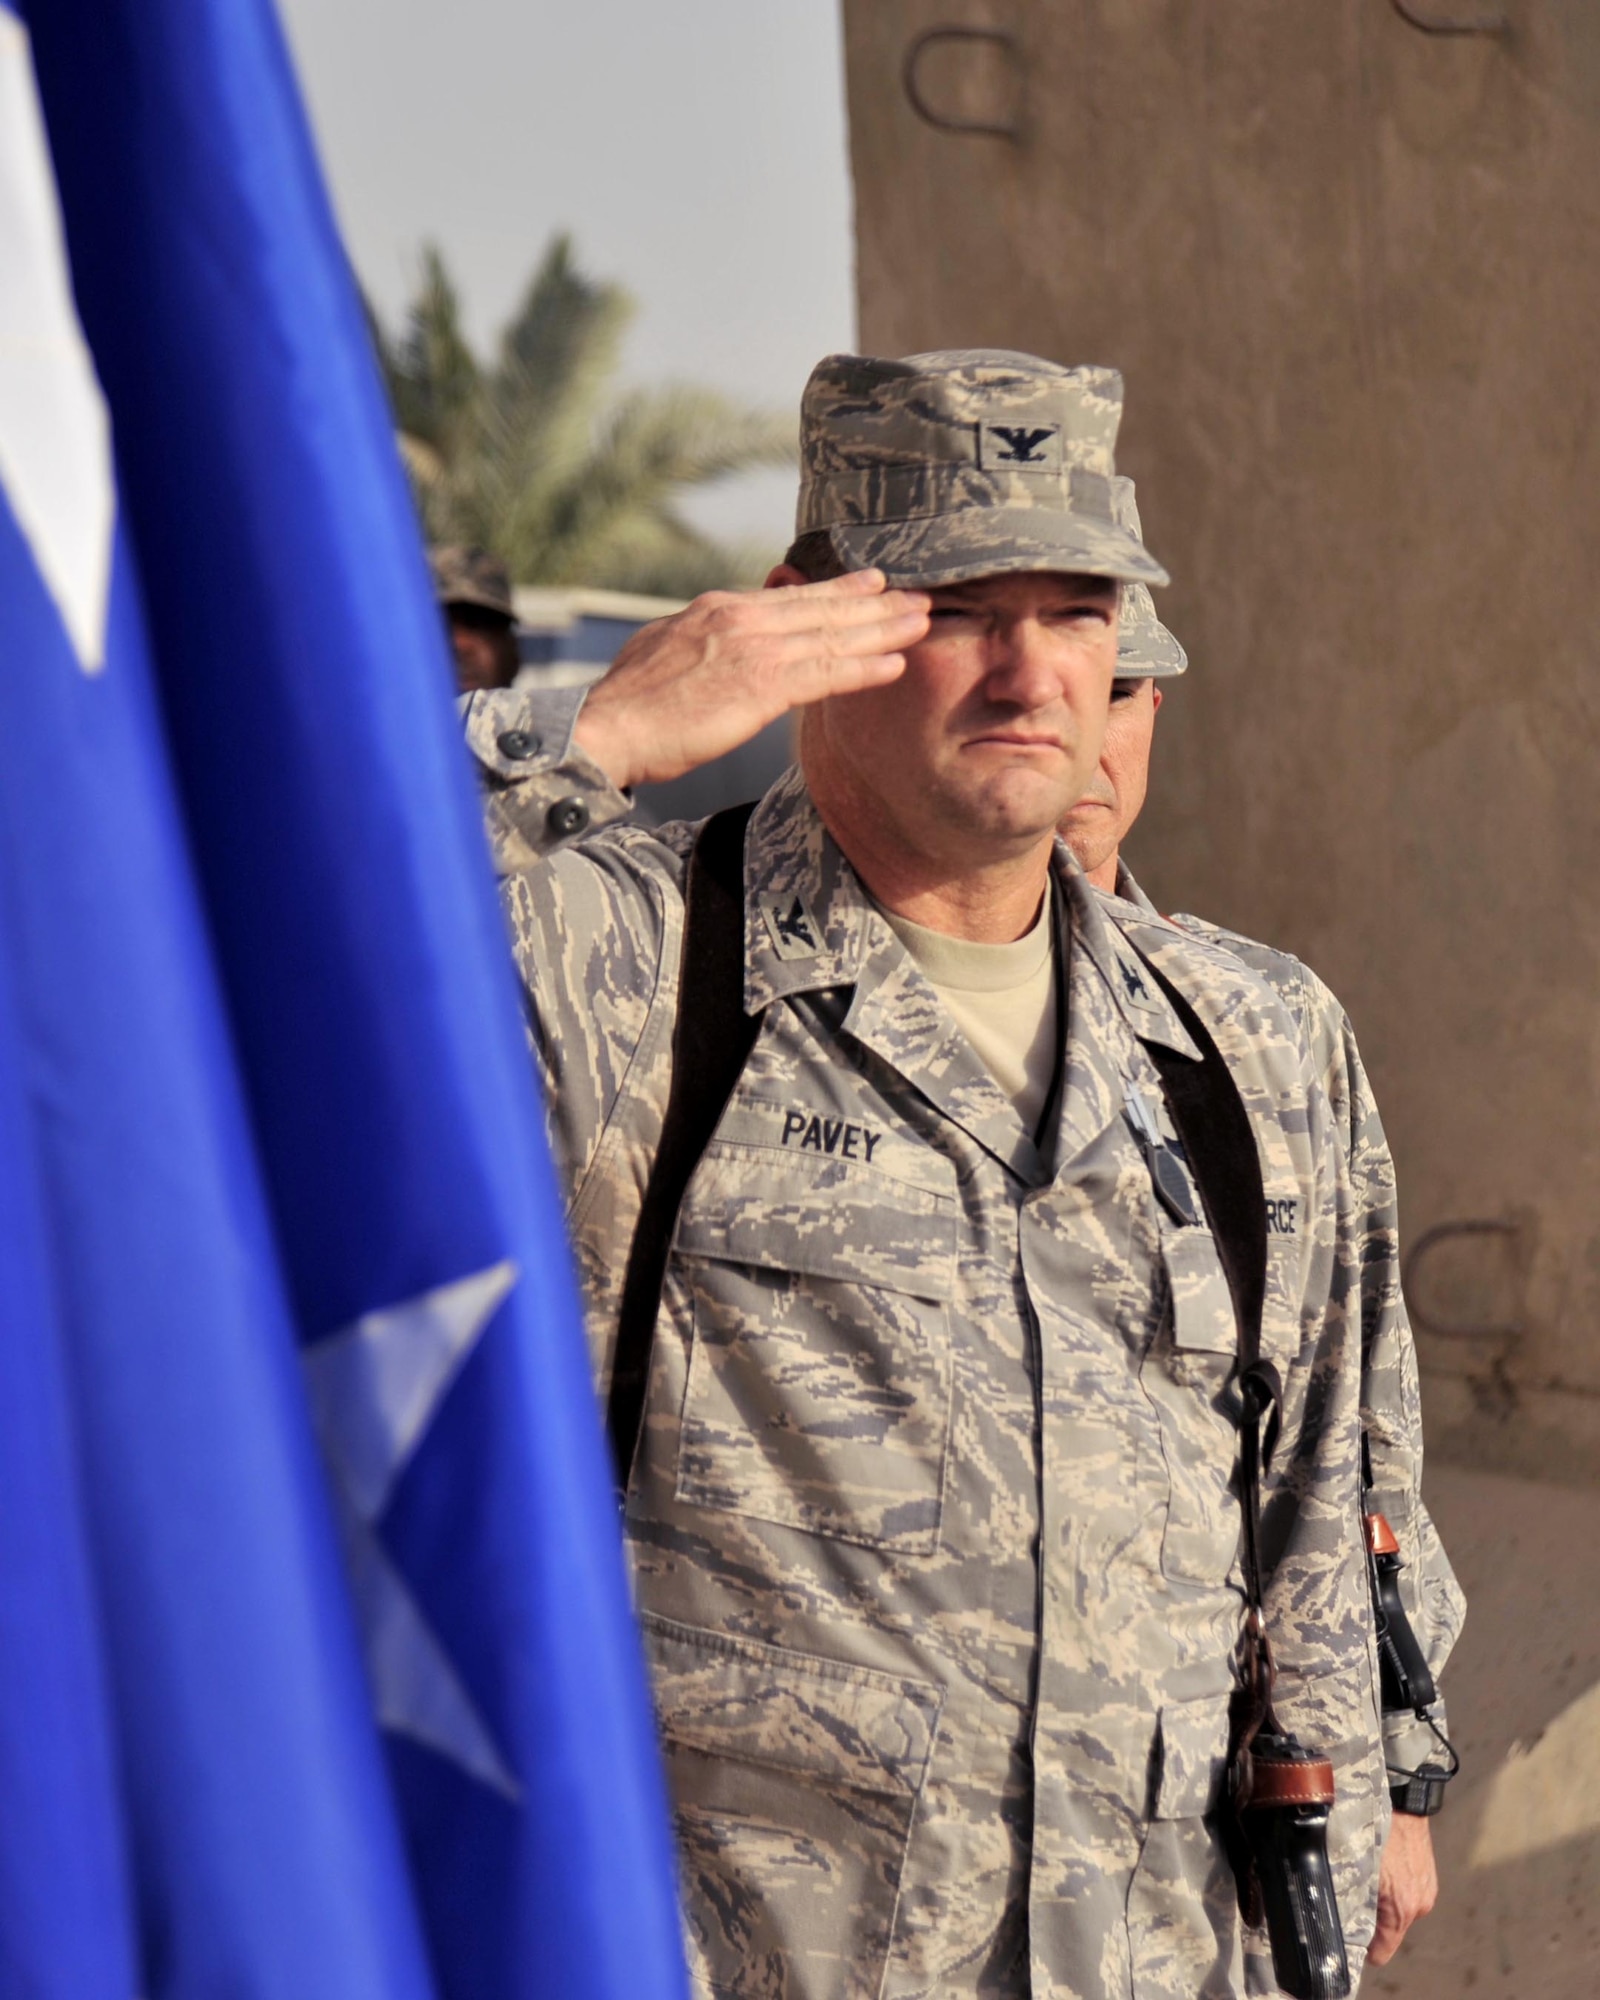 Col. David Pavey salutes during the national anthem at a ceremony marking the seven-year anniversary of the terrorist attacks of Sept. 11, 2001, Sept. 11 at Sather Air Base, Iraq. Colonel Pavey is the 447th Air Expeditionary Group commander. (U.S. Air Force photo/Master Sgt. Brian Davidson) 
